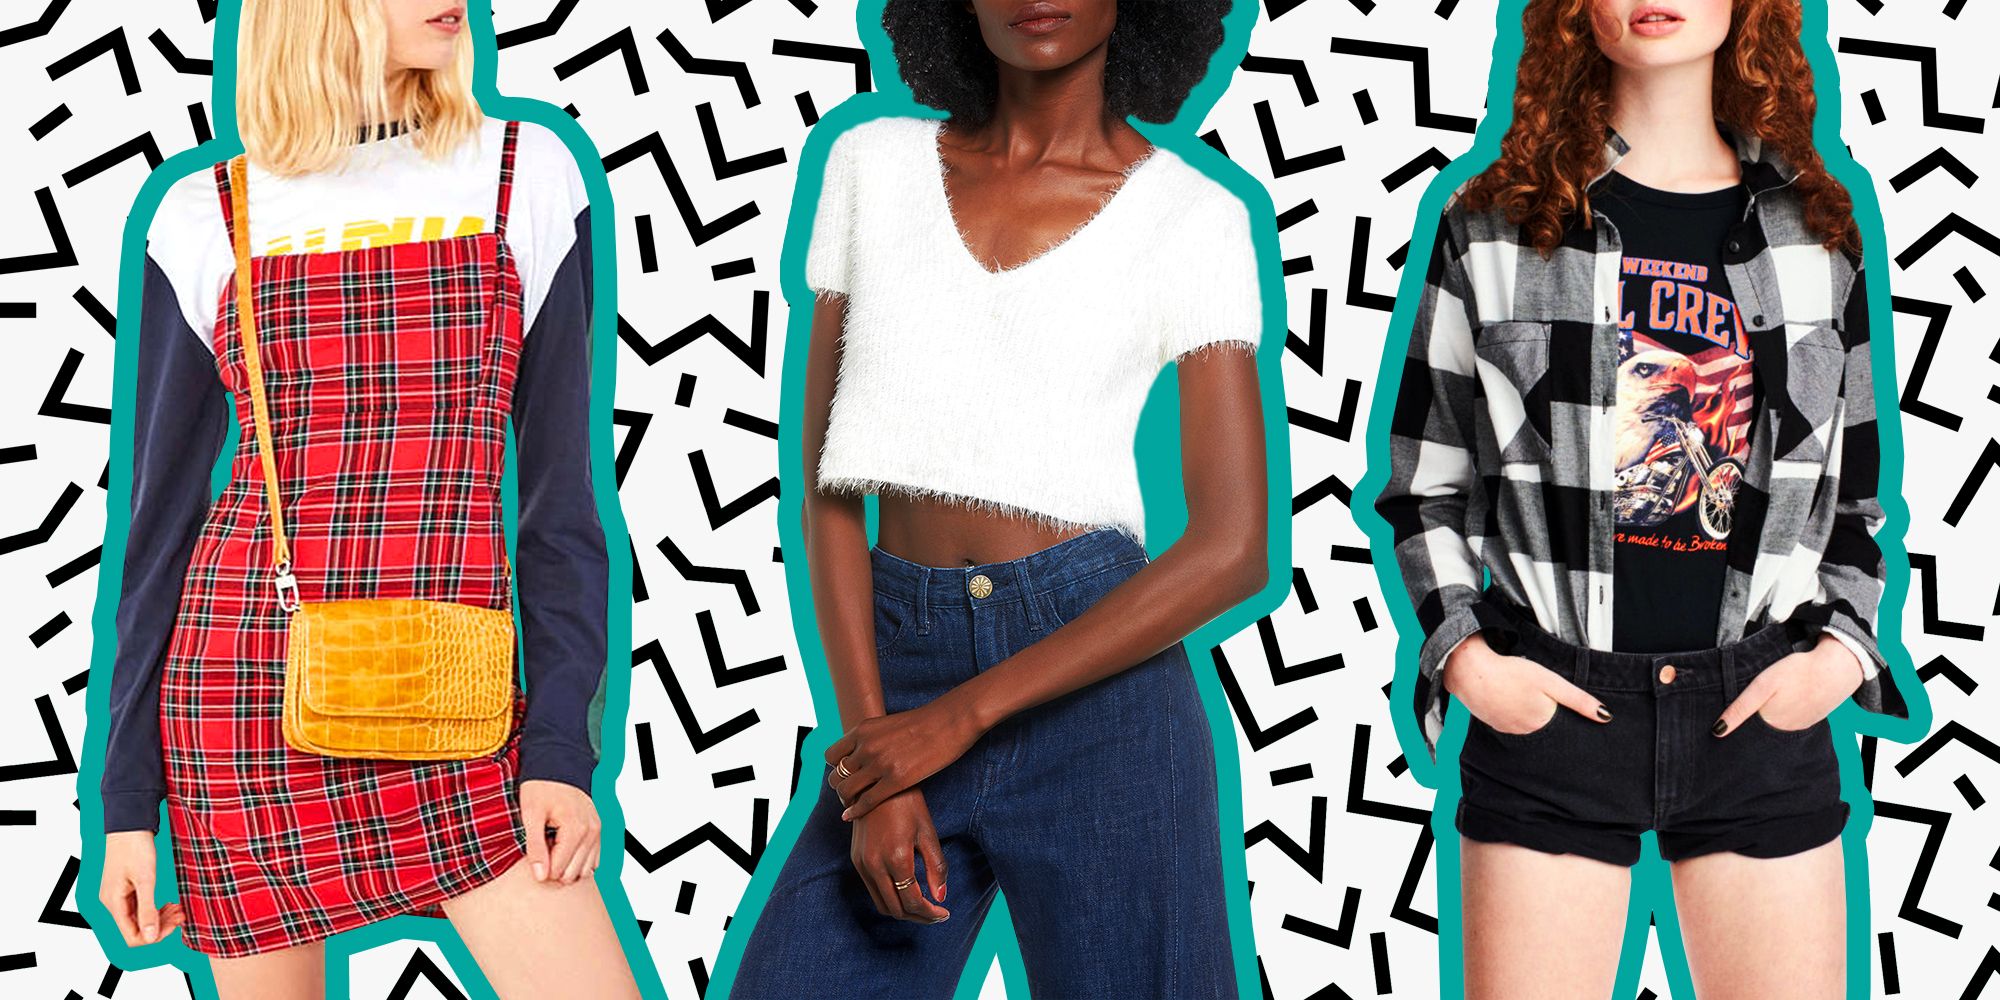 Best '90s Fashion Trends - Fashion Trends Inspired by the '90s